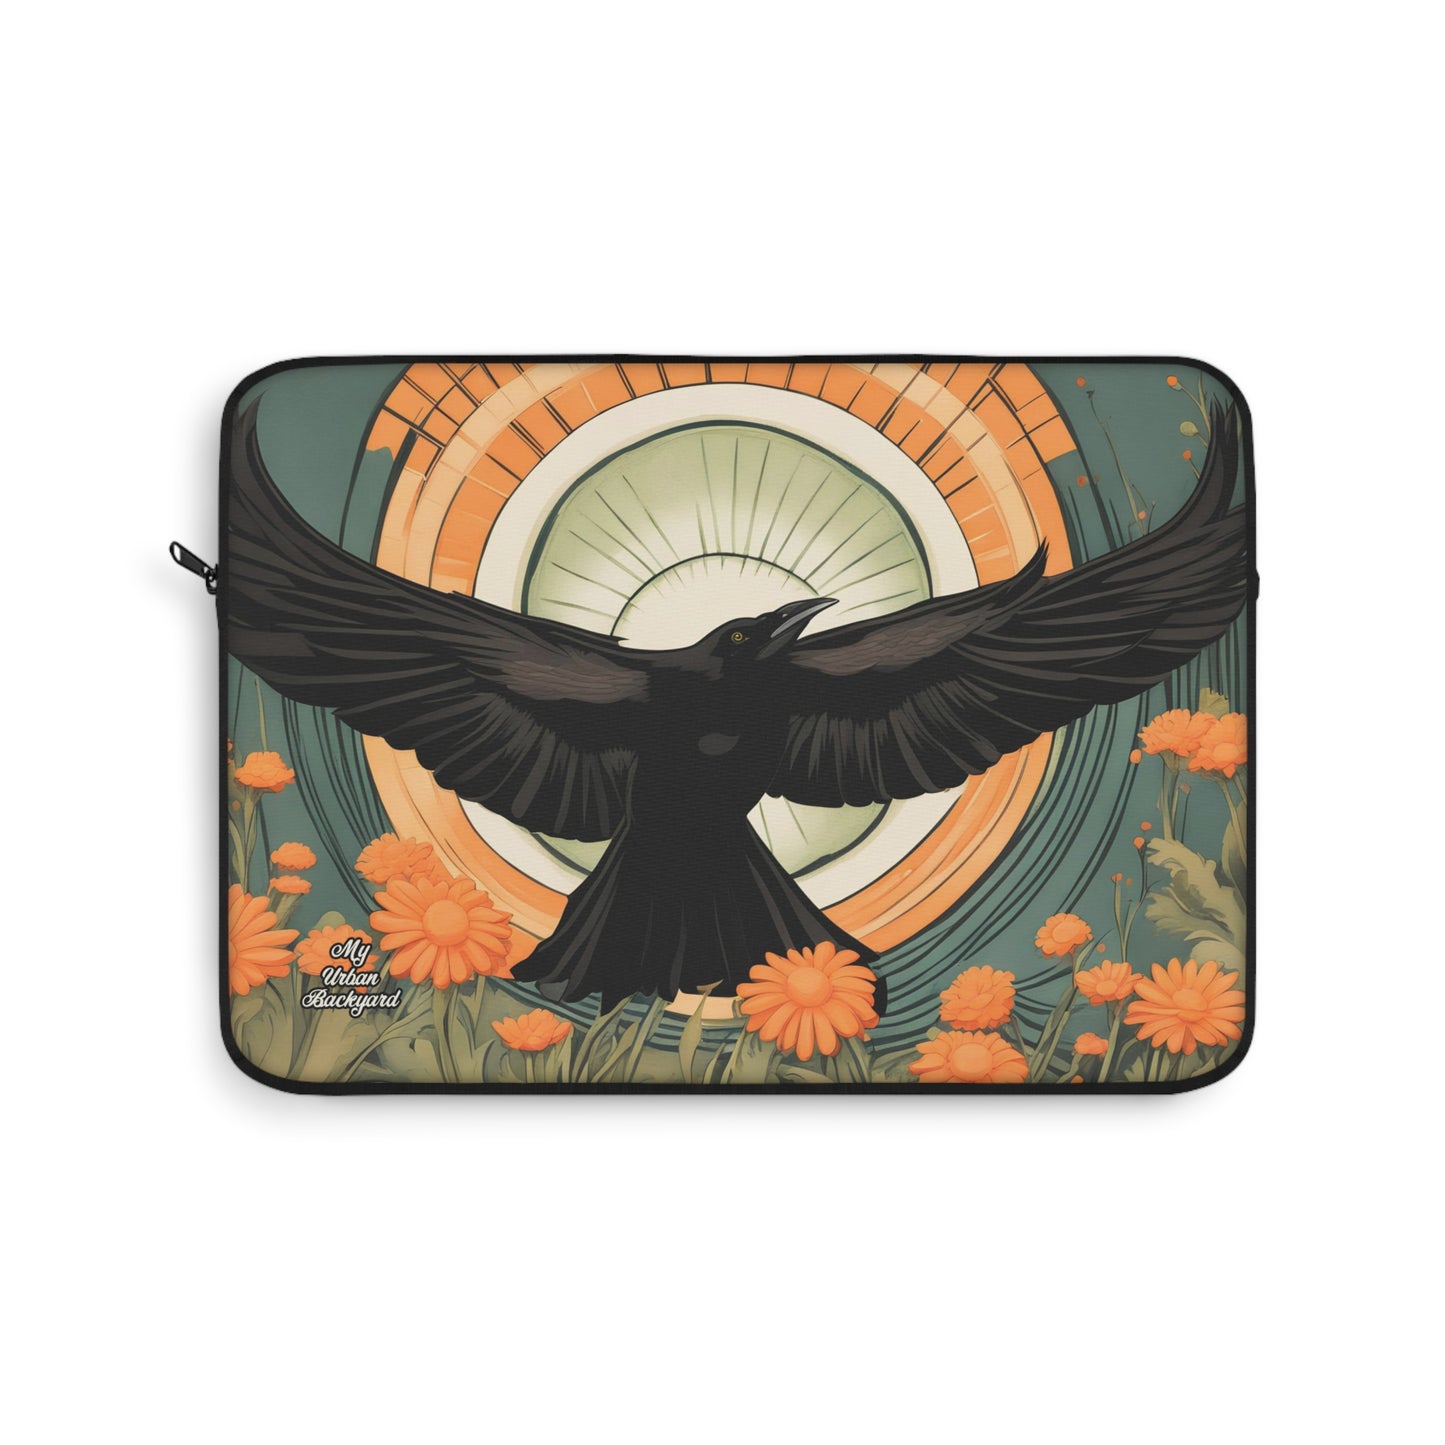 Flying Crow, Laptop Carrying Case, Top Loading Sleeve for School or Work